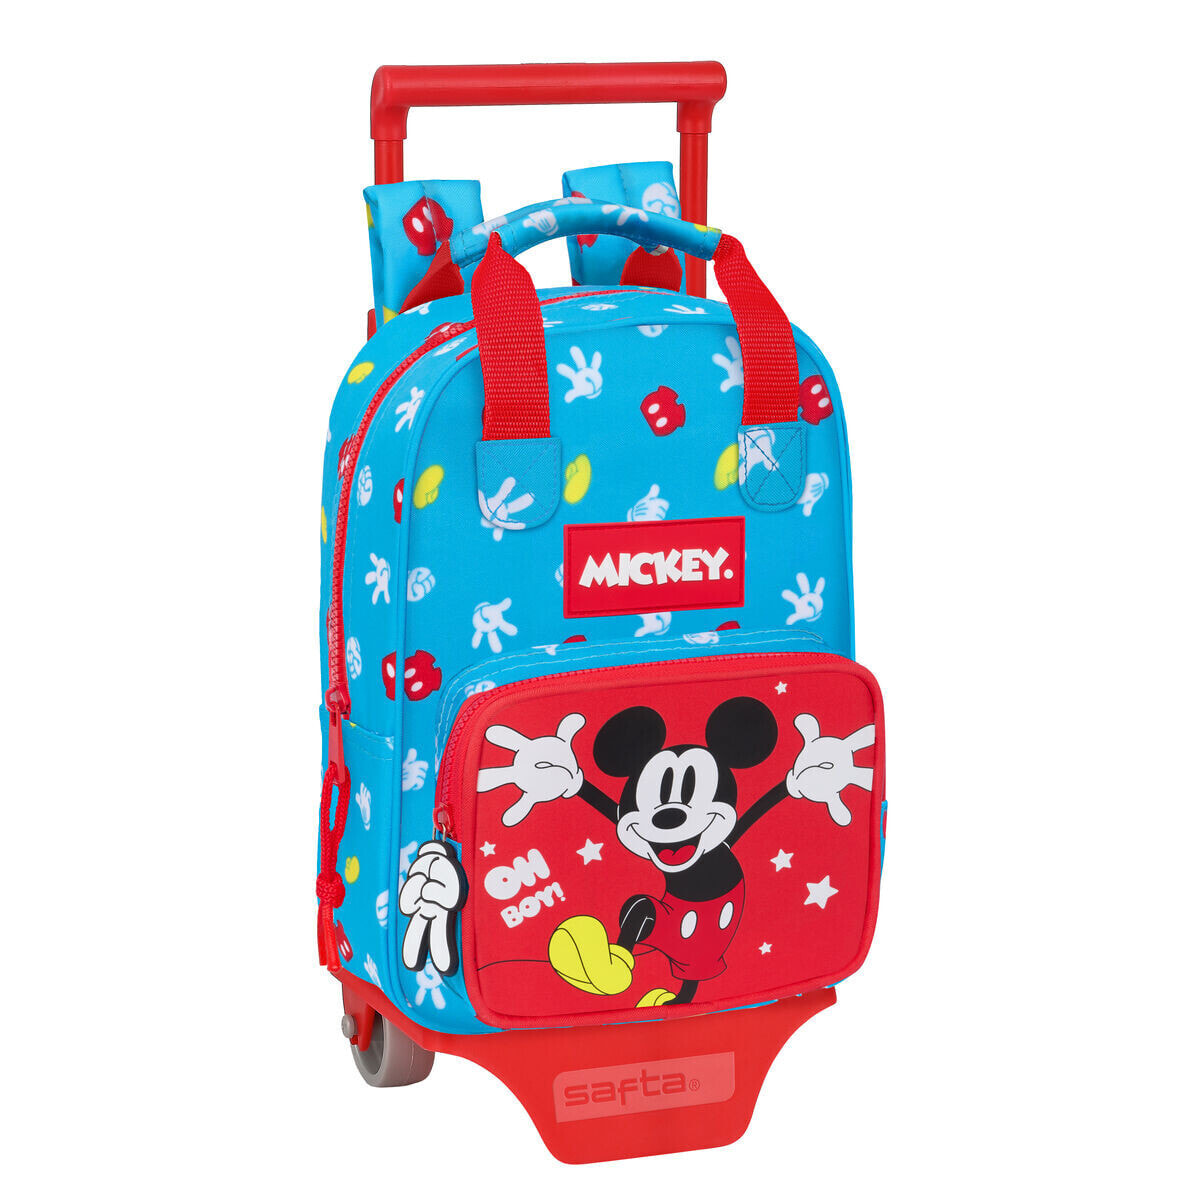 School Rucksack with Wheels Mickey Mouse Clubhouse Fantastic Blue Red 20 x 28 x 8 cm